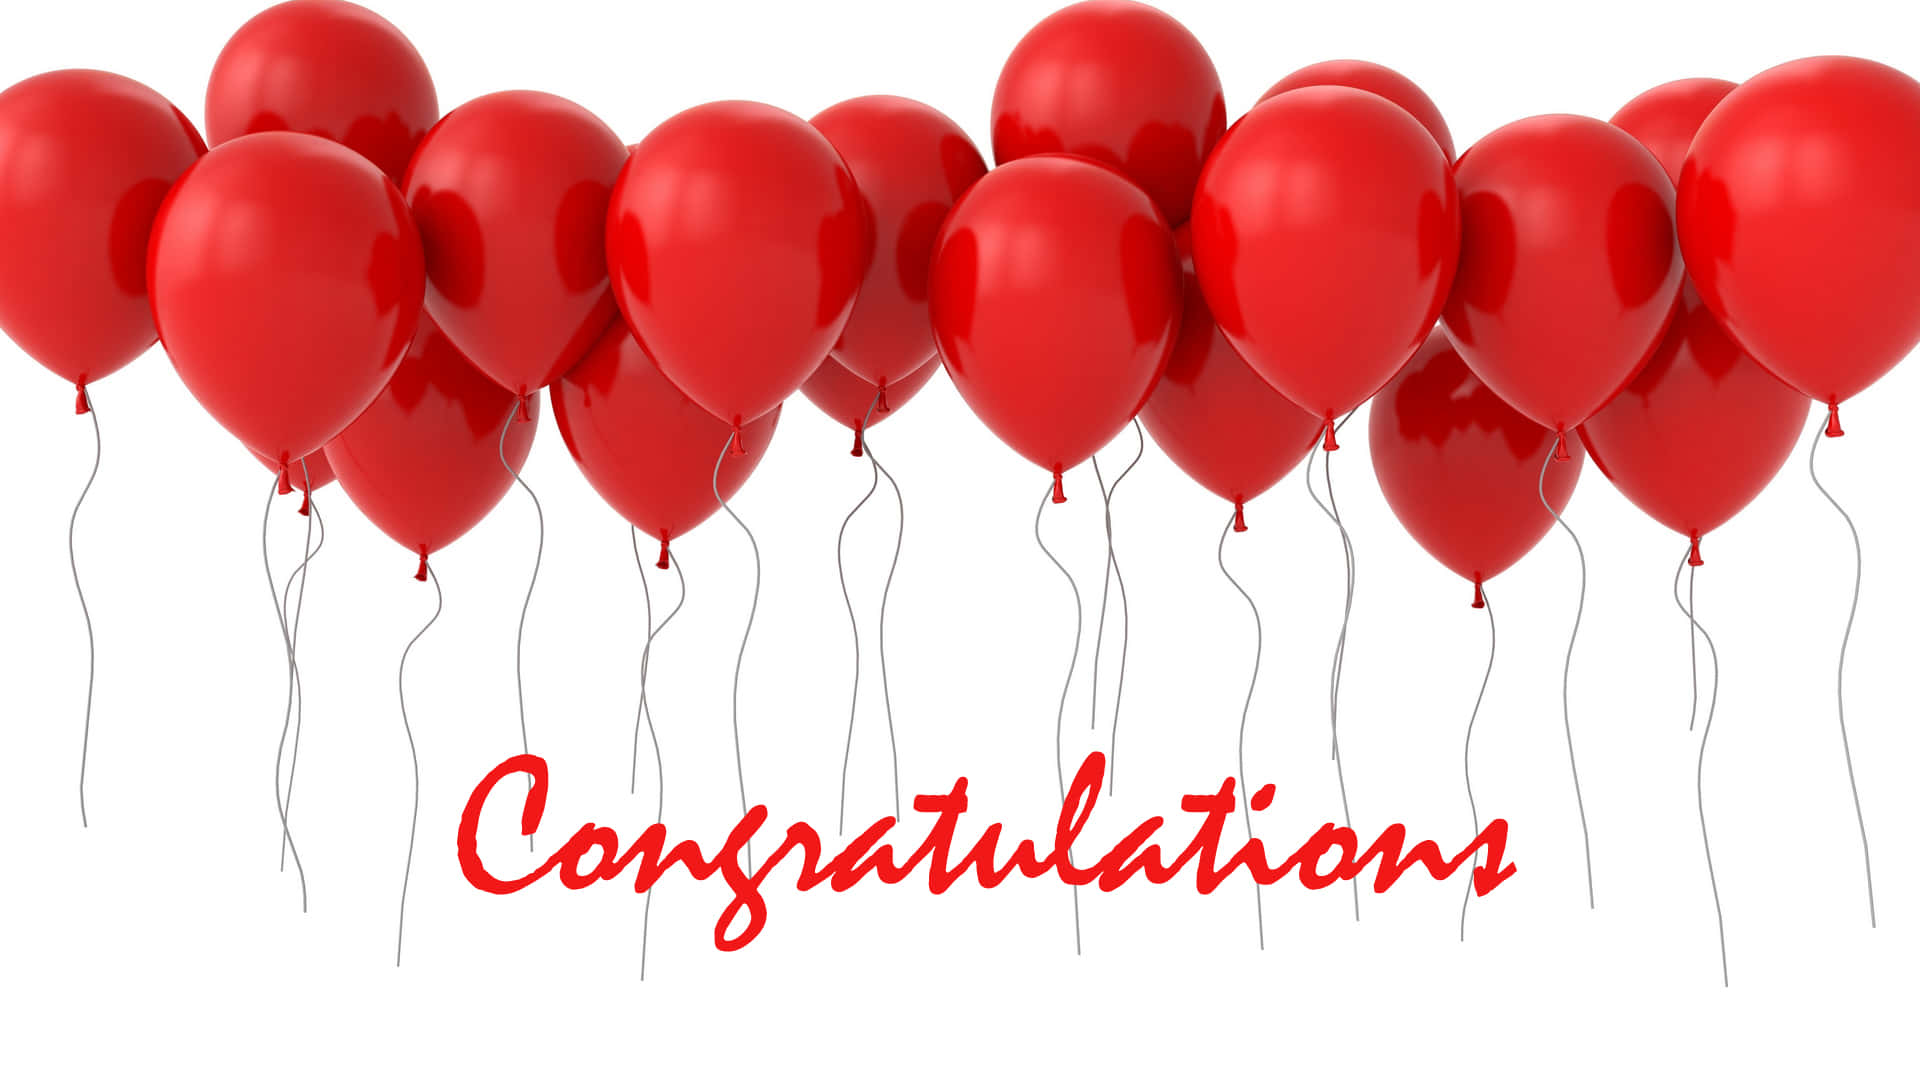 Congratulations Balloons With The Words Congratulations